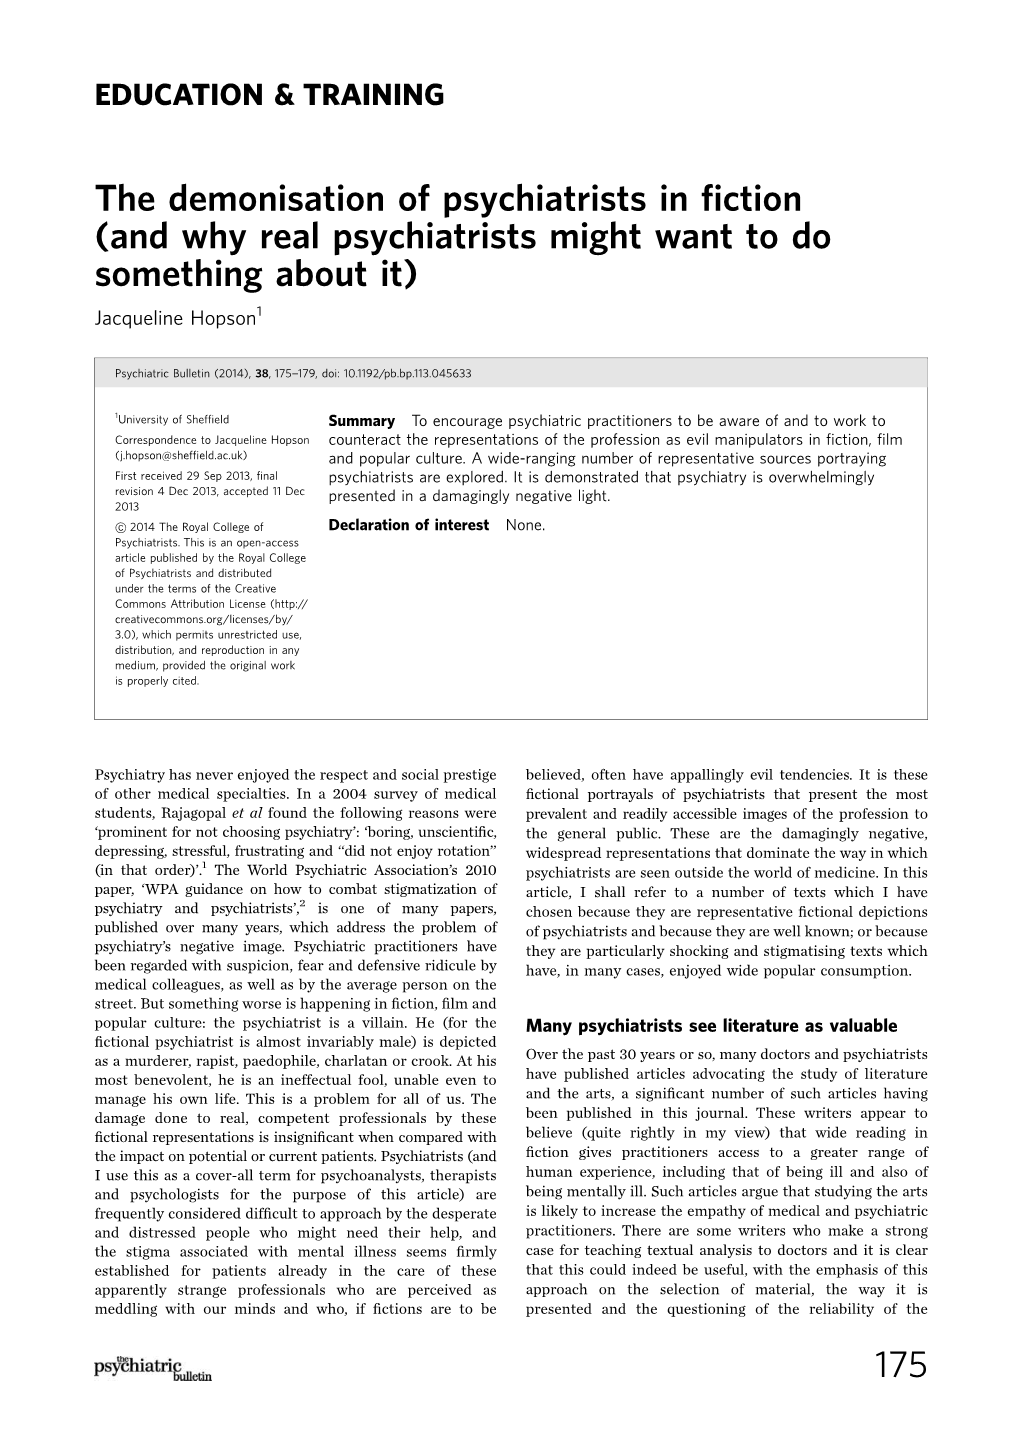 The Demonisation of Psychiatrists in Fiction (And Why Real Psychiatrists Might Want to Do Something About It) Jacqueline Hopson Psychiatric Bulletin 2014, 38:175-179